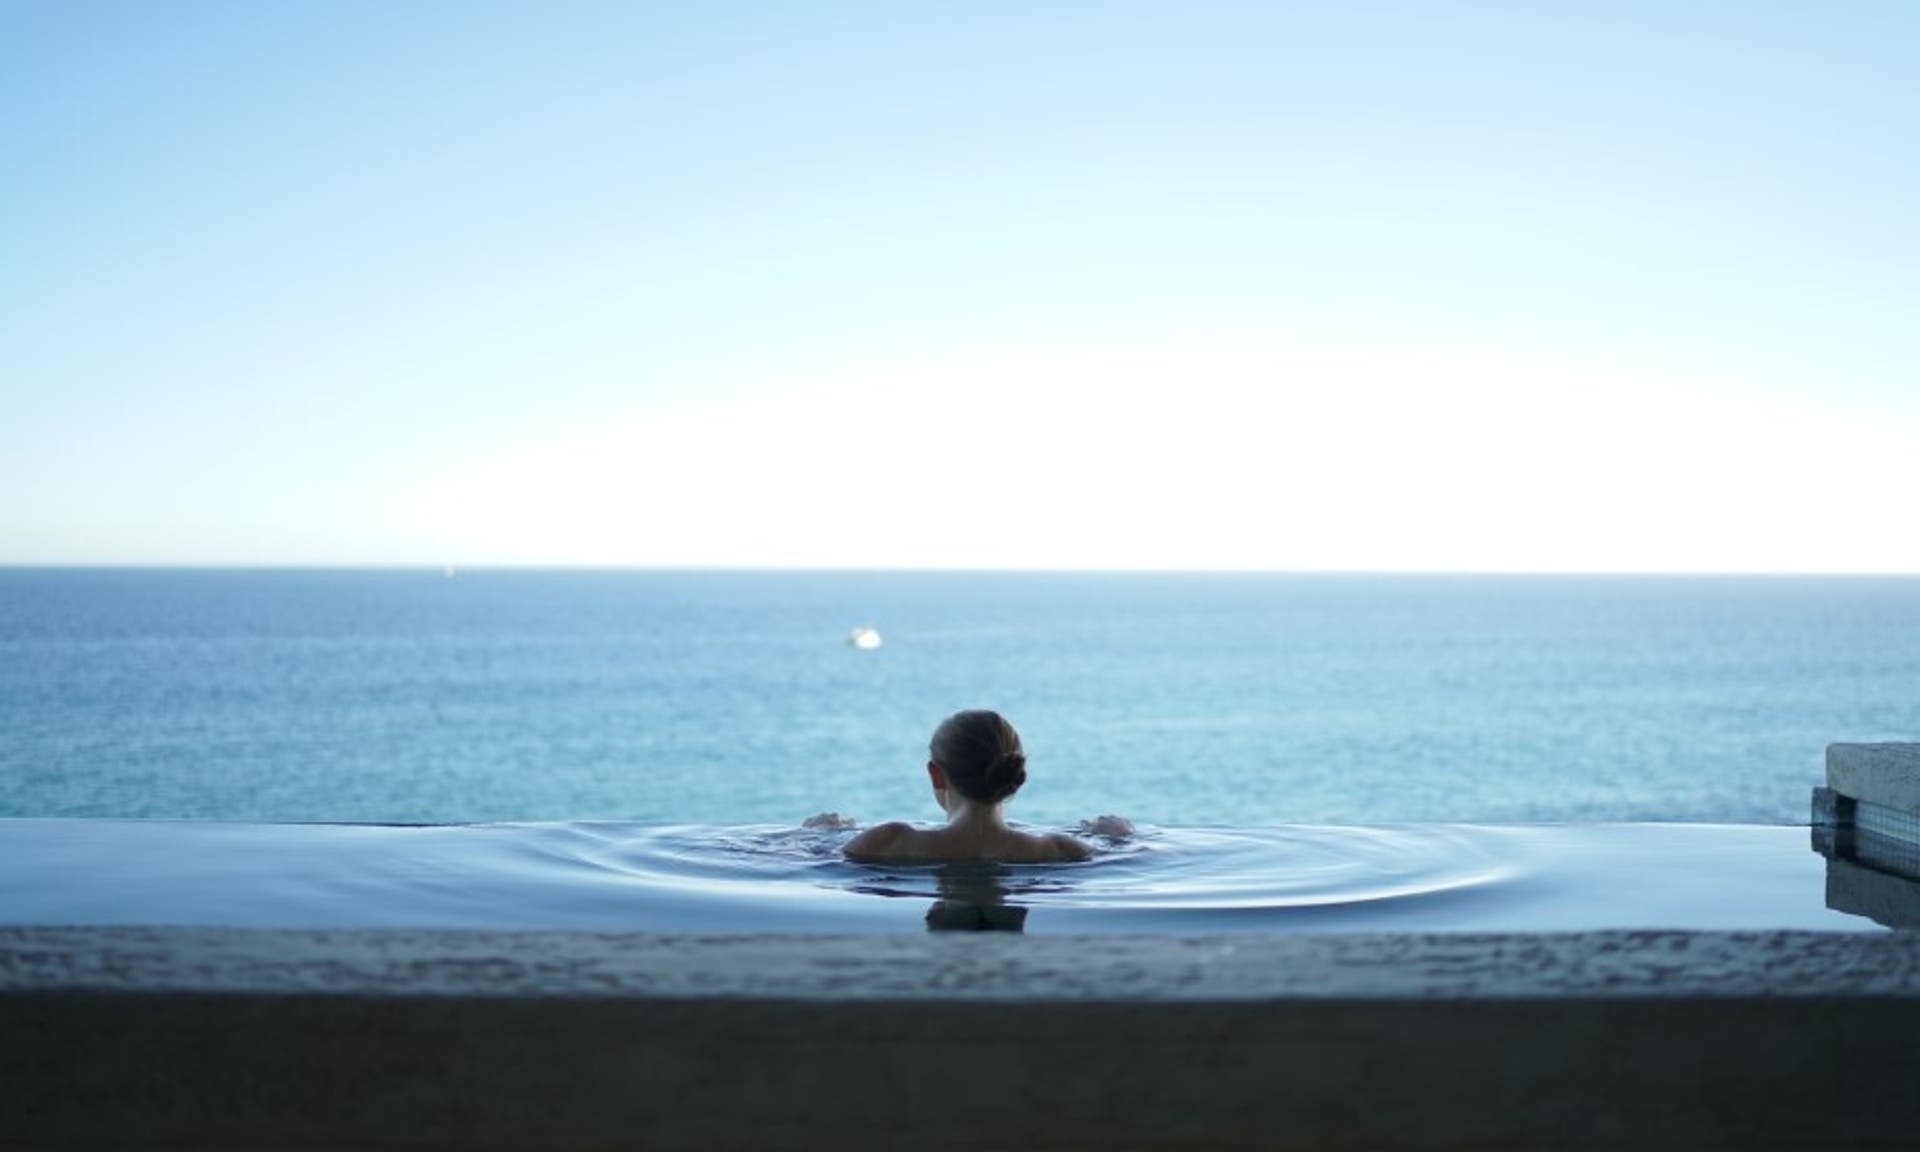  Image of a woman in an infinity pool, overlooking a sea view 